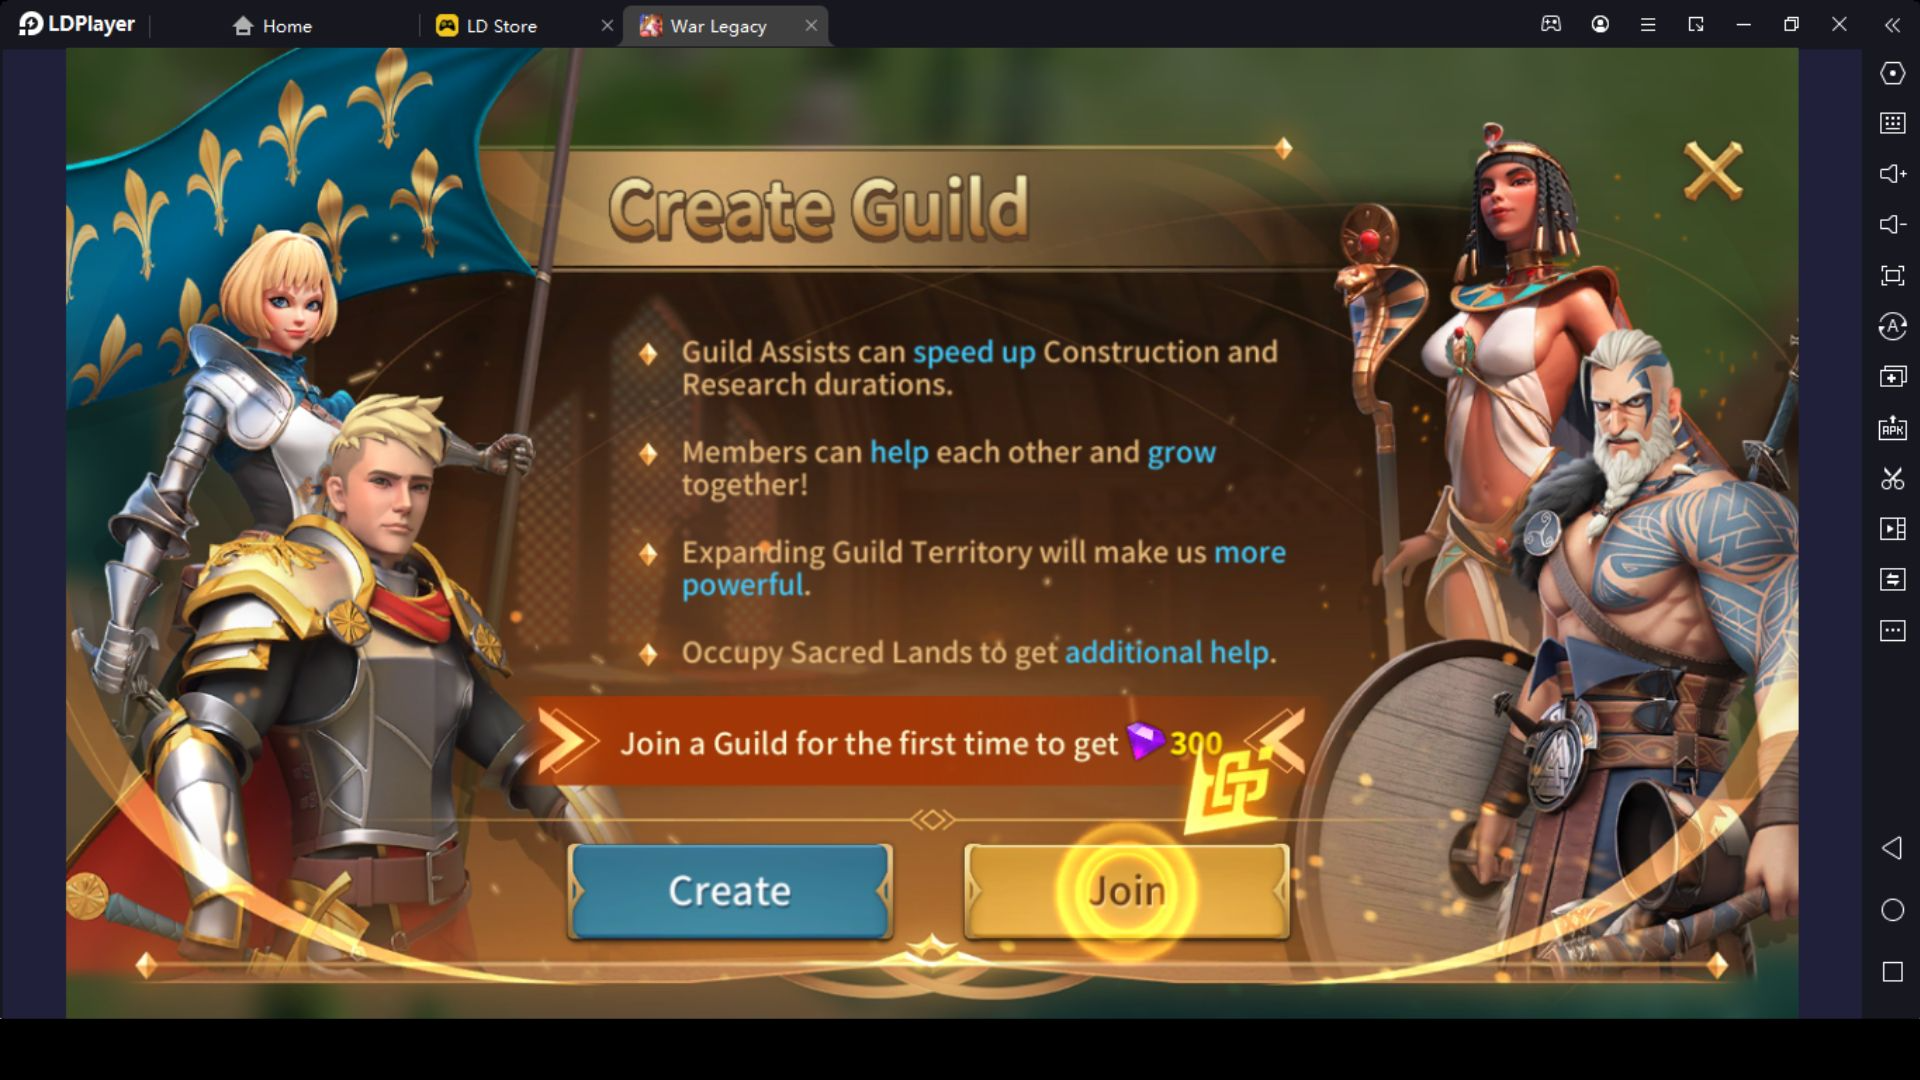 Join or Create a Guild